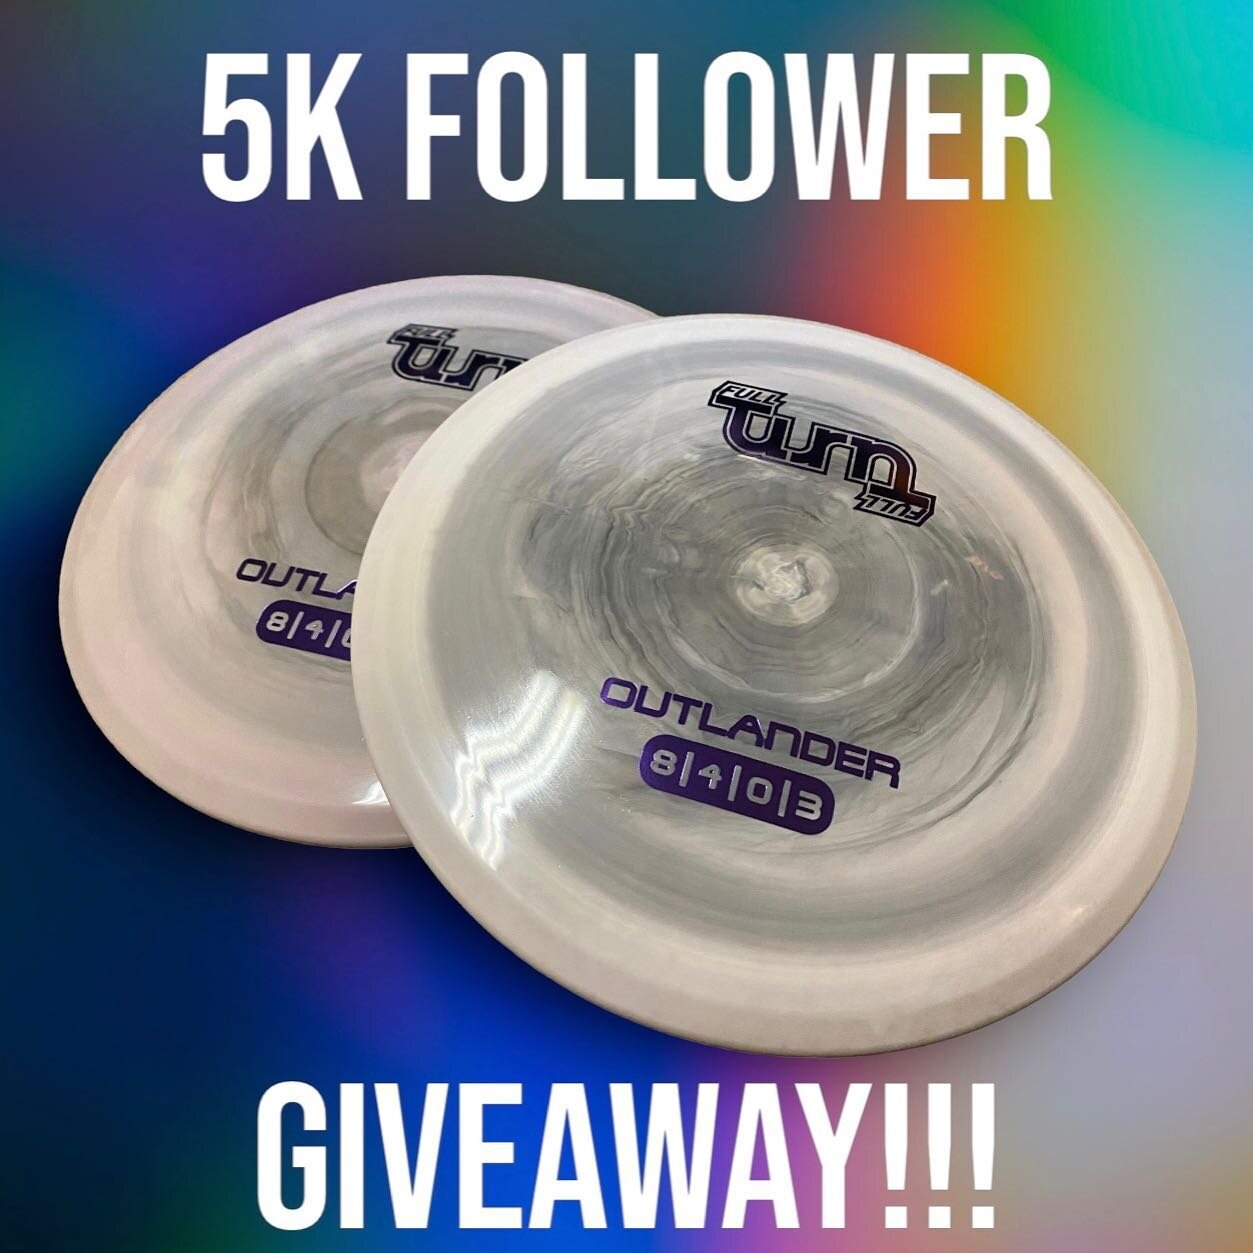 Giveaway time!!! Who wants these swirly Express Outlanders?? 

Follow our page and tag 2 friends on this post. Once we reach 5,000 followers, we&rsquo;ll select a winner! 

#fullturndiscs #prodiscus #gatewaydiscsports #discgolf #discgolflife #discgol